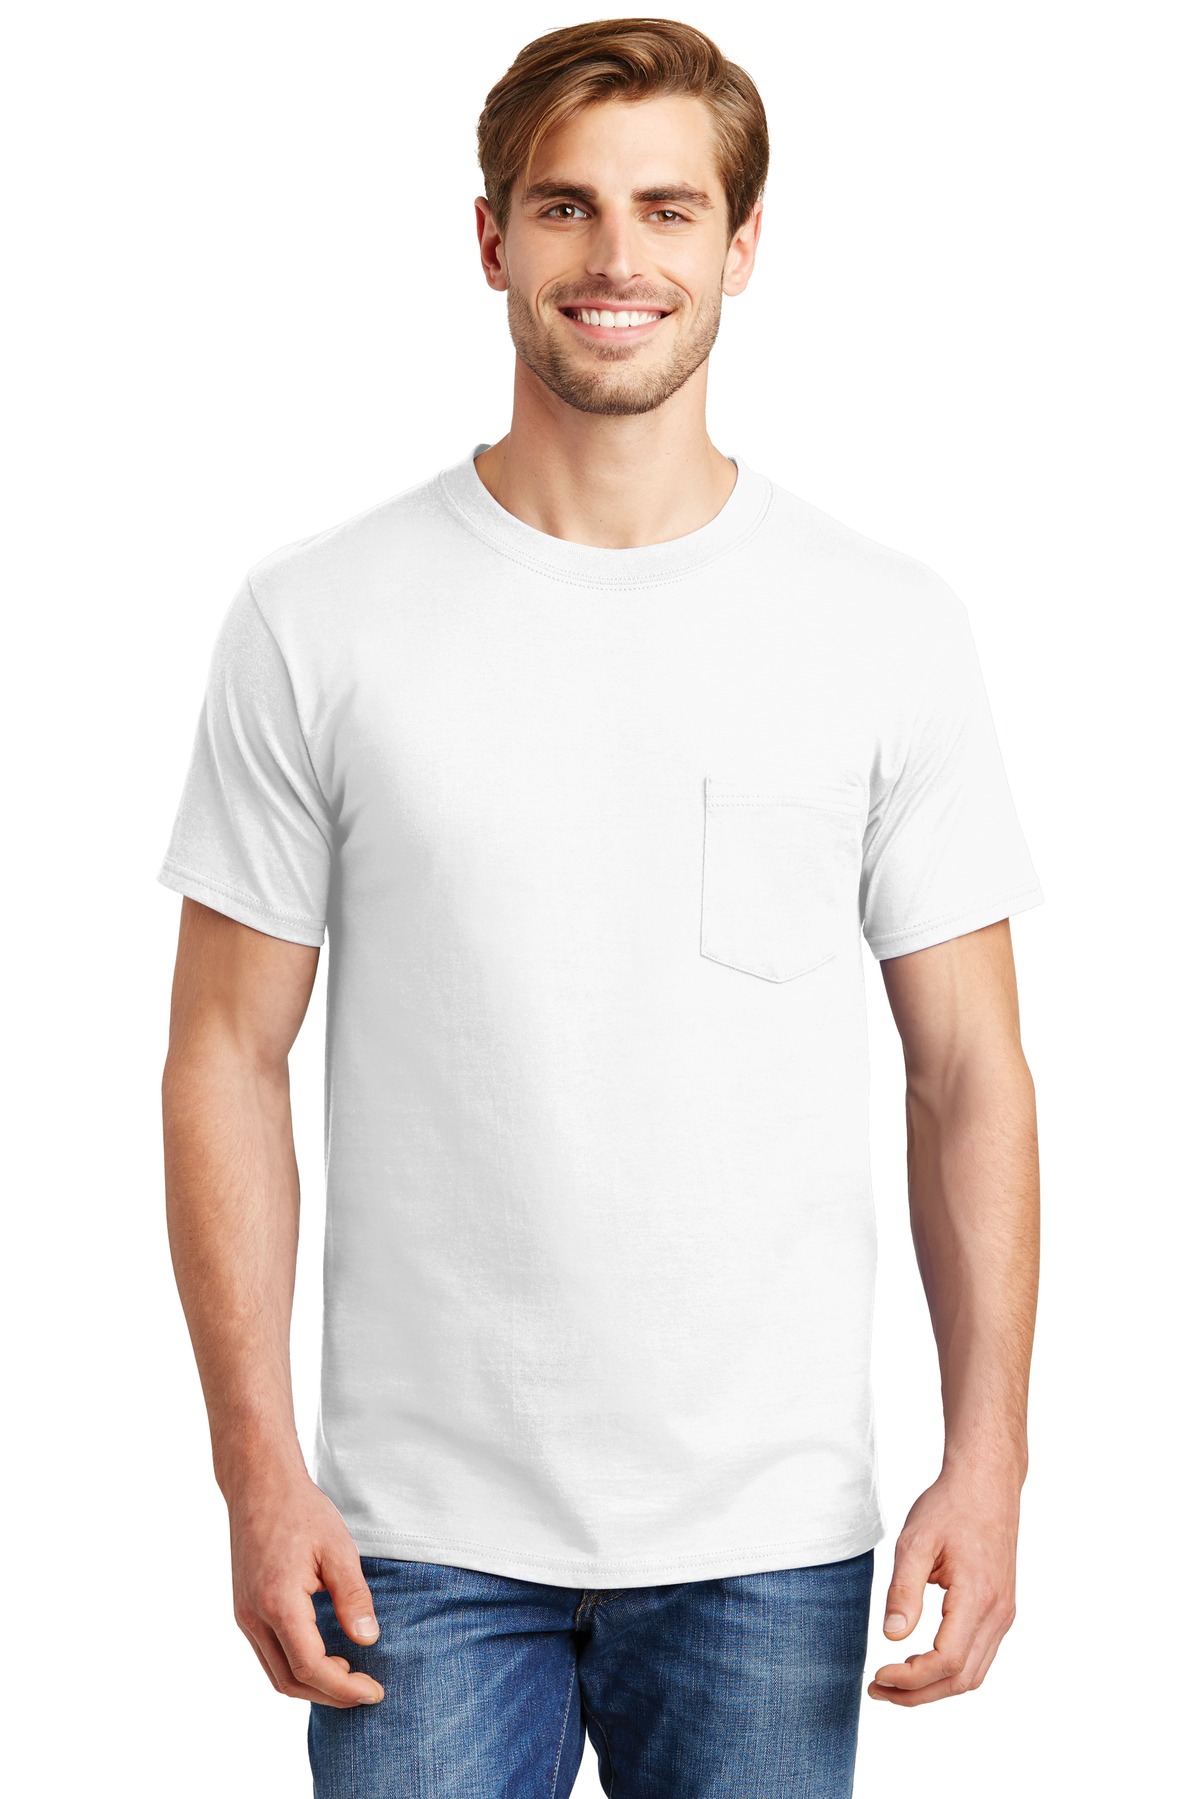 Hanes Beefy-T - 100% Cotton T-Shirt with Pocket-